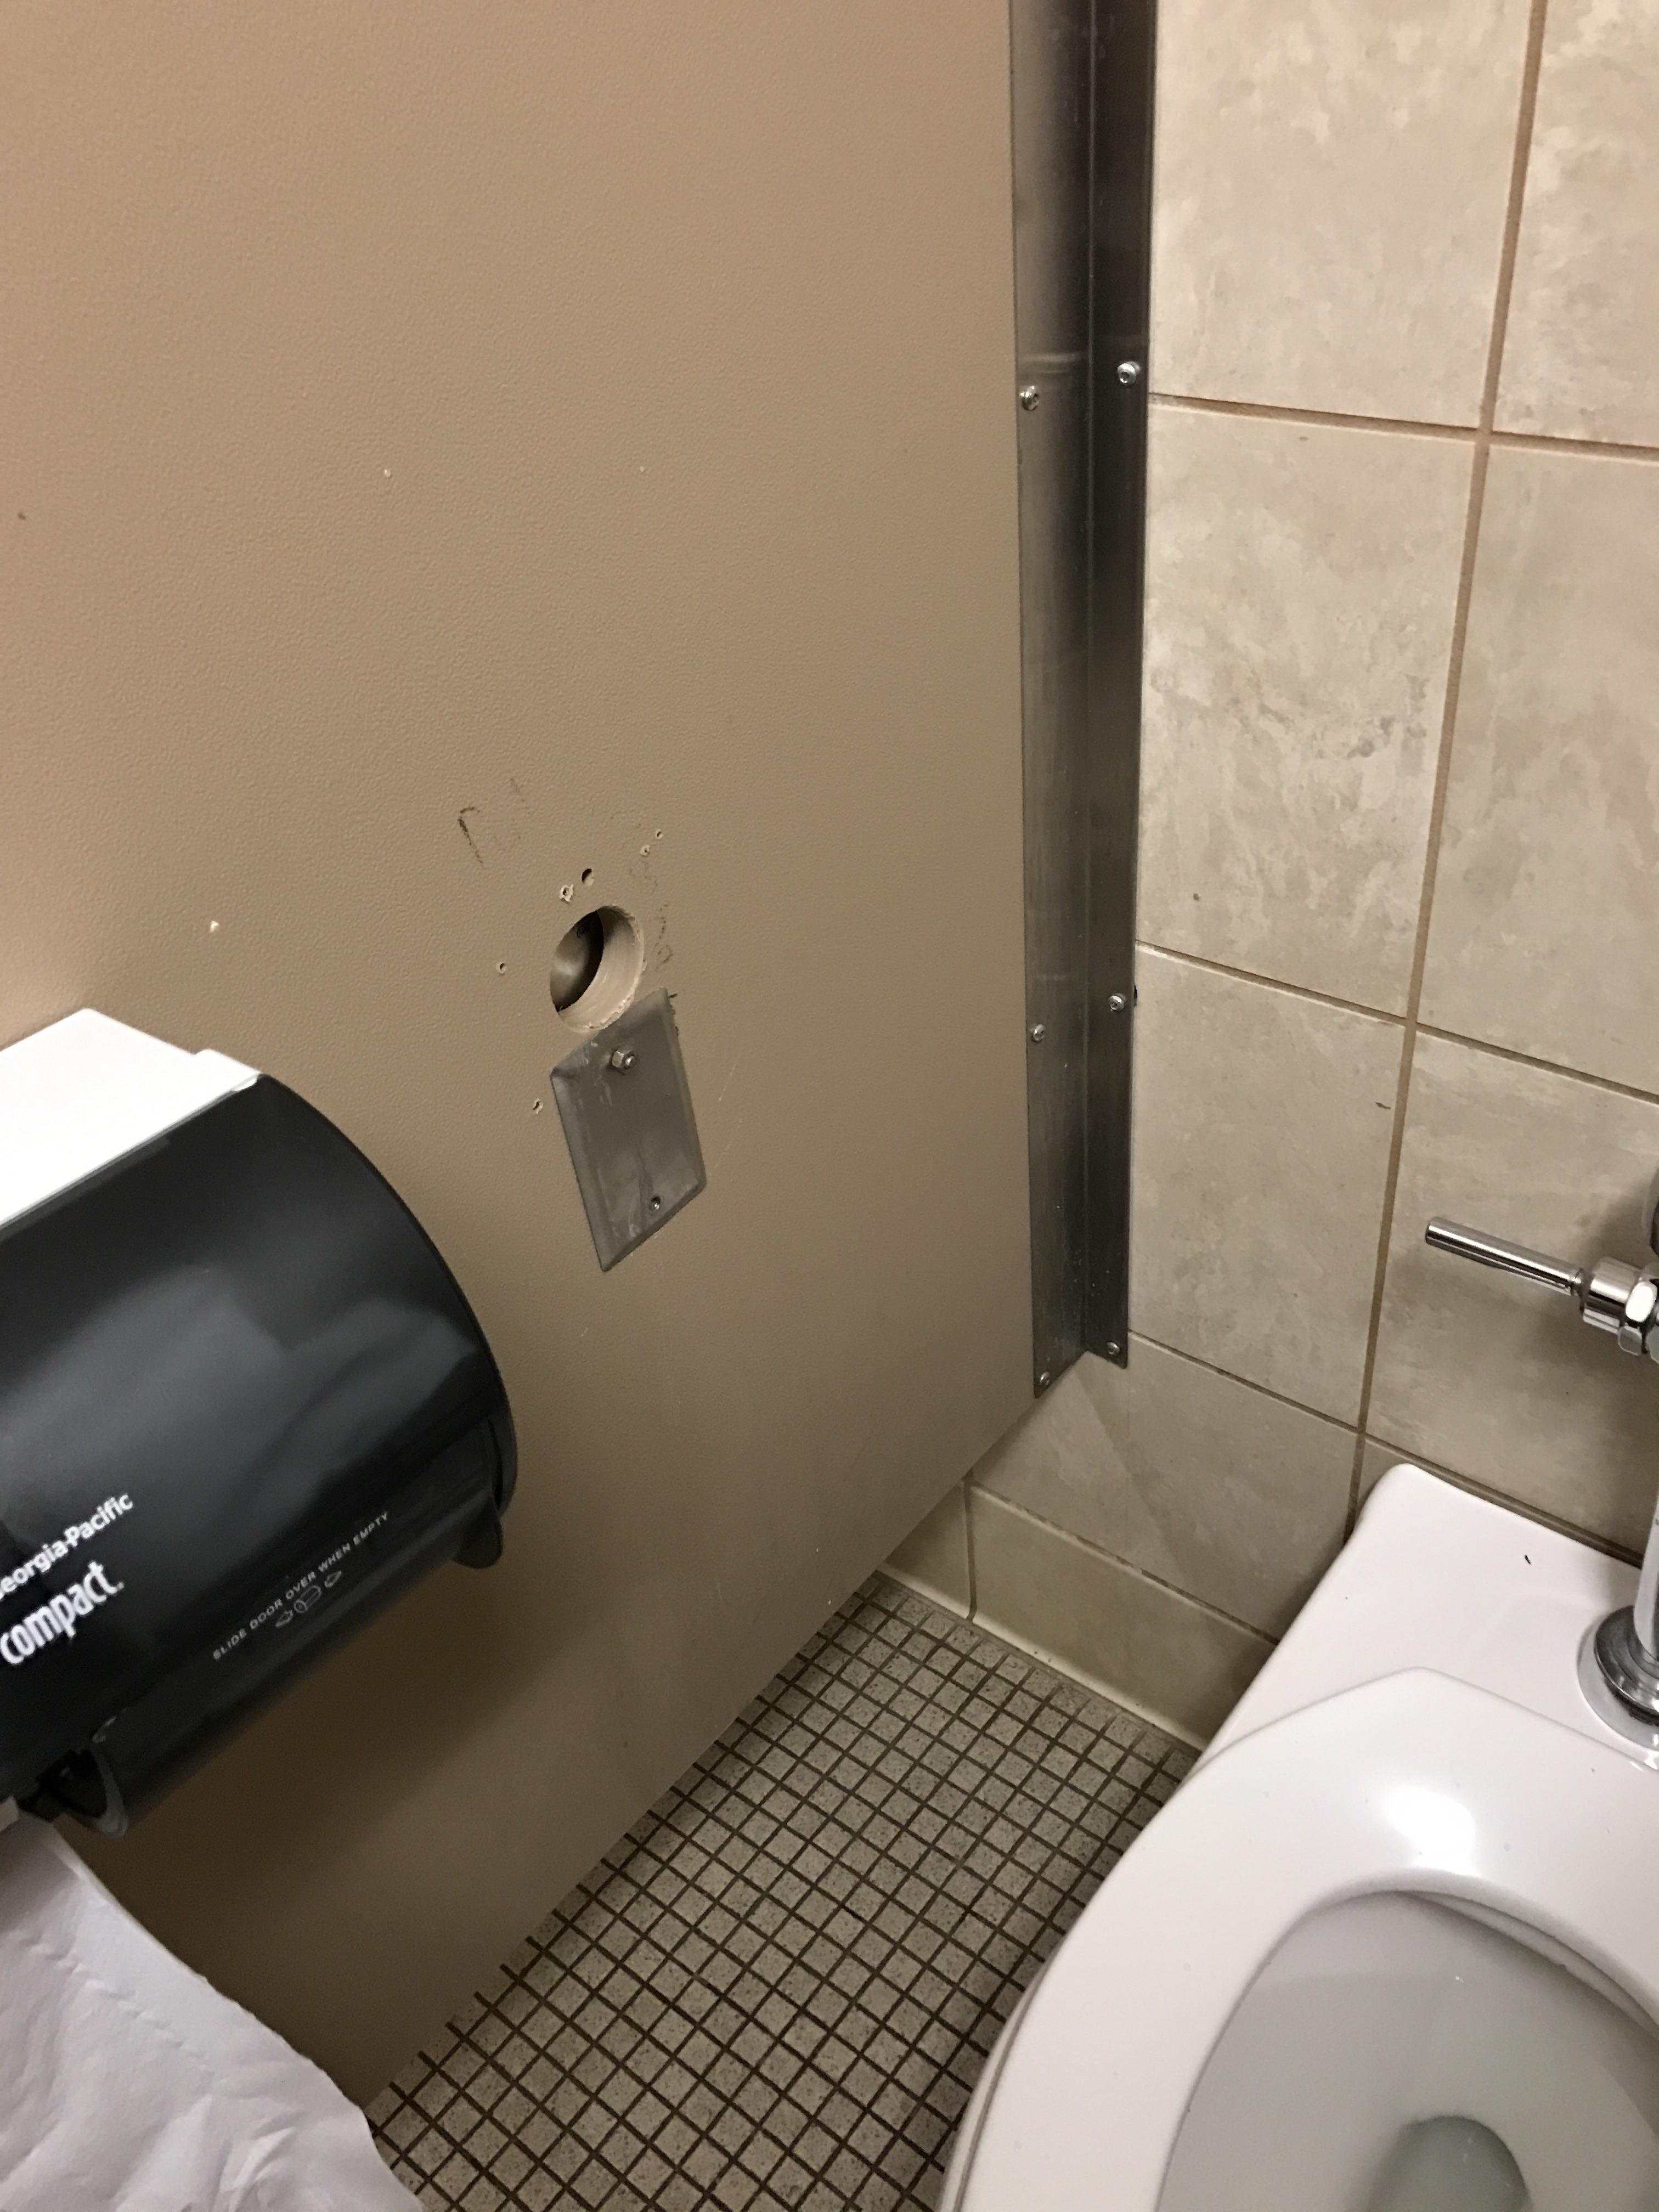 Toilet sex hole in wall picture picture